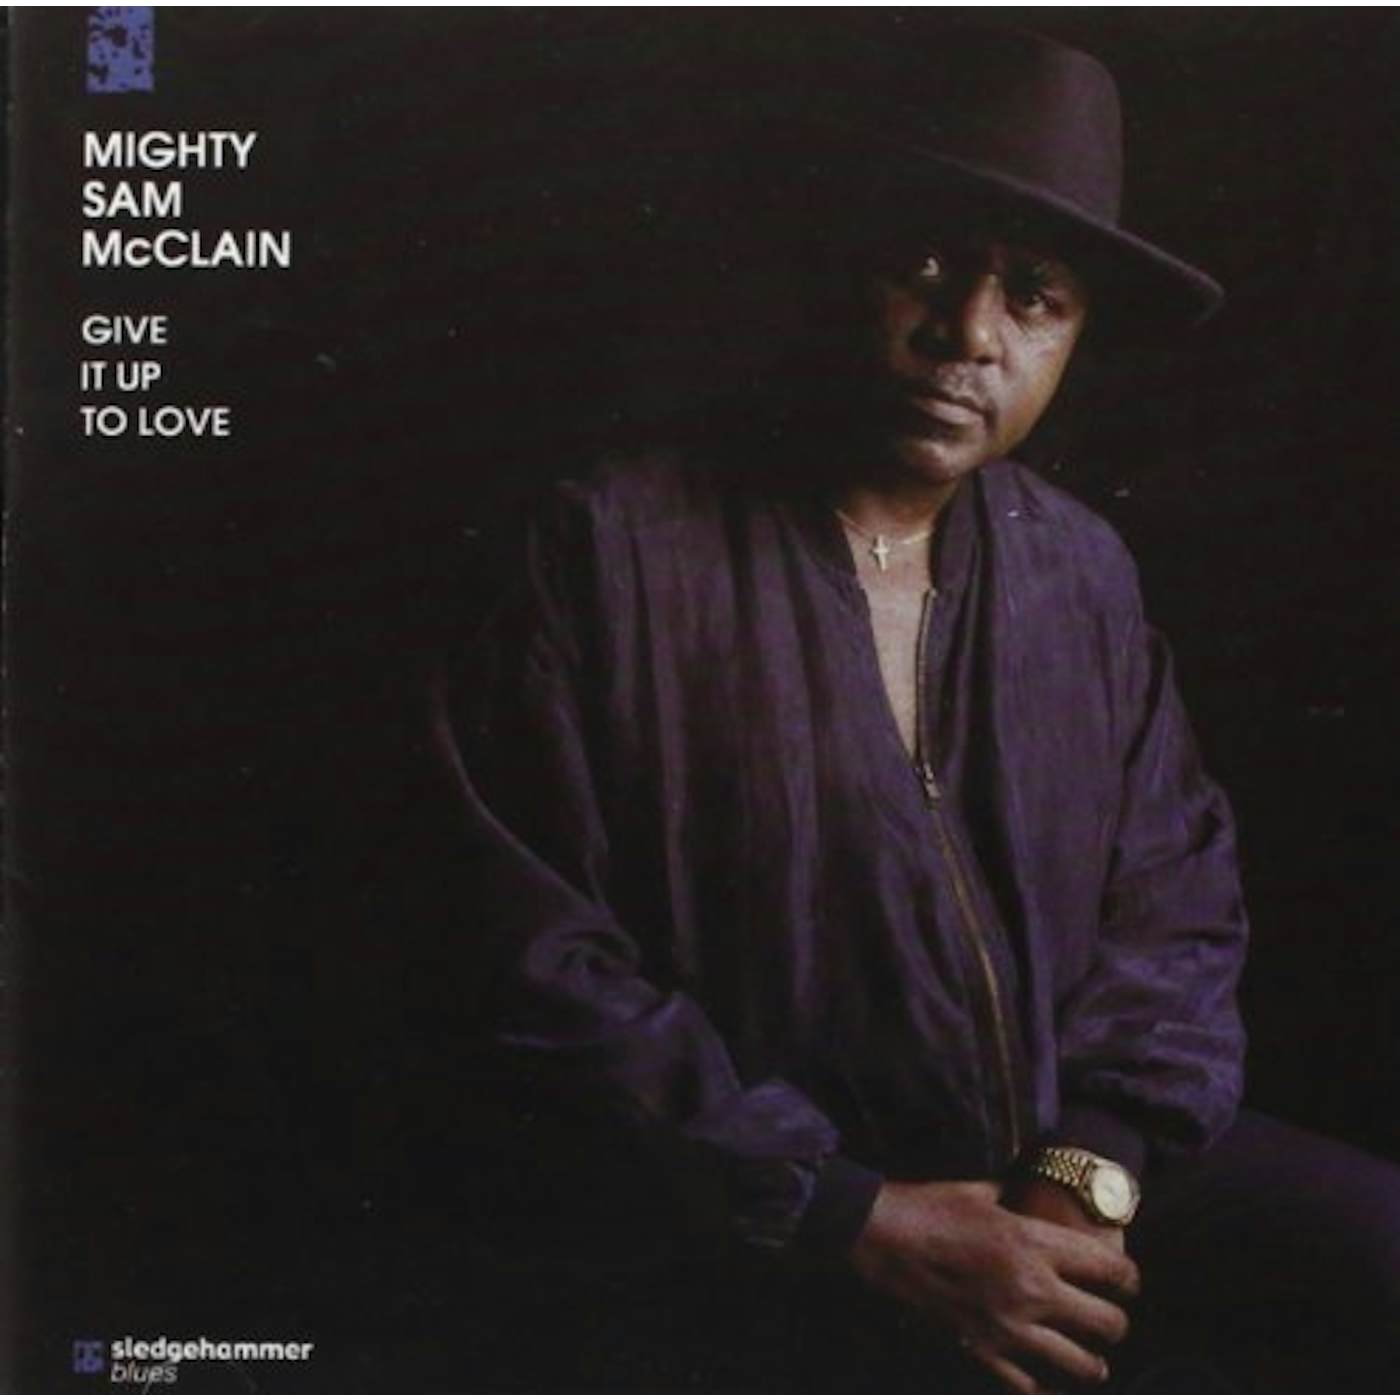 Mighty Sam McClain GIVE IT UP TO LOVE CD